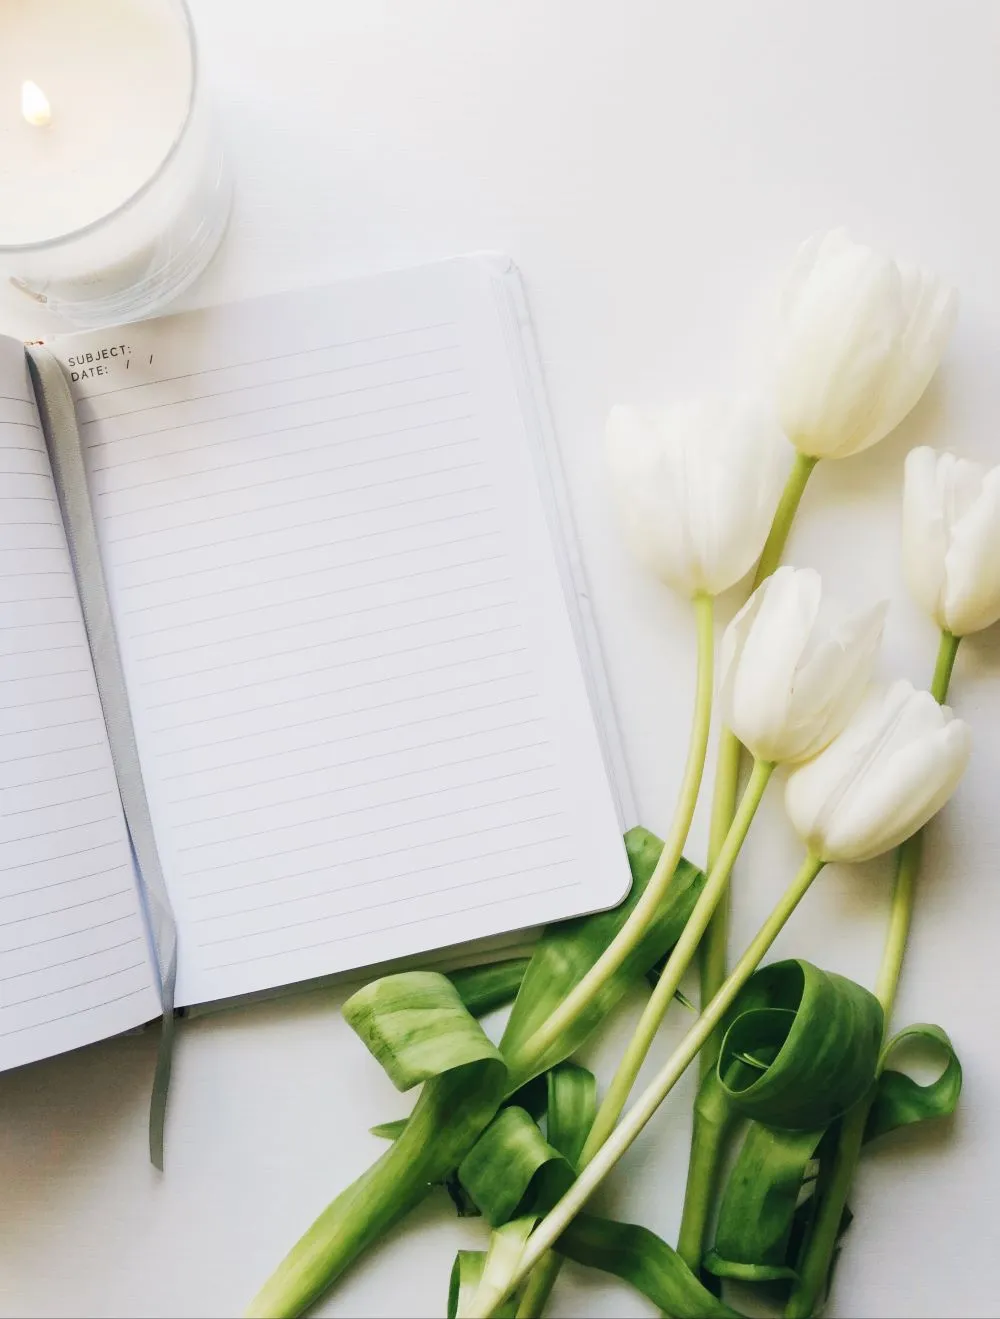 A blank journal on a desk with white tulips beside it